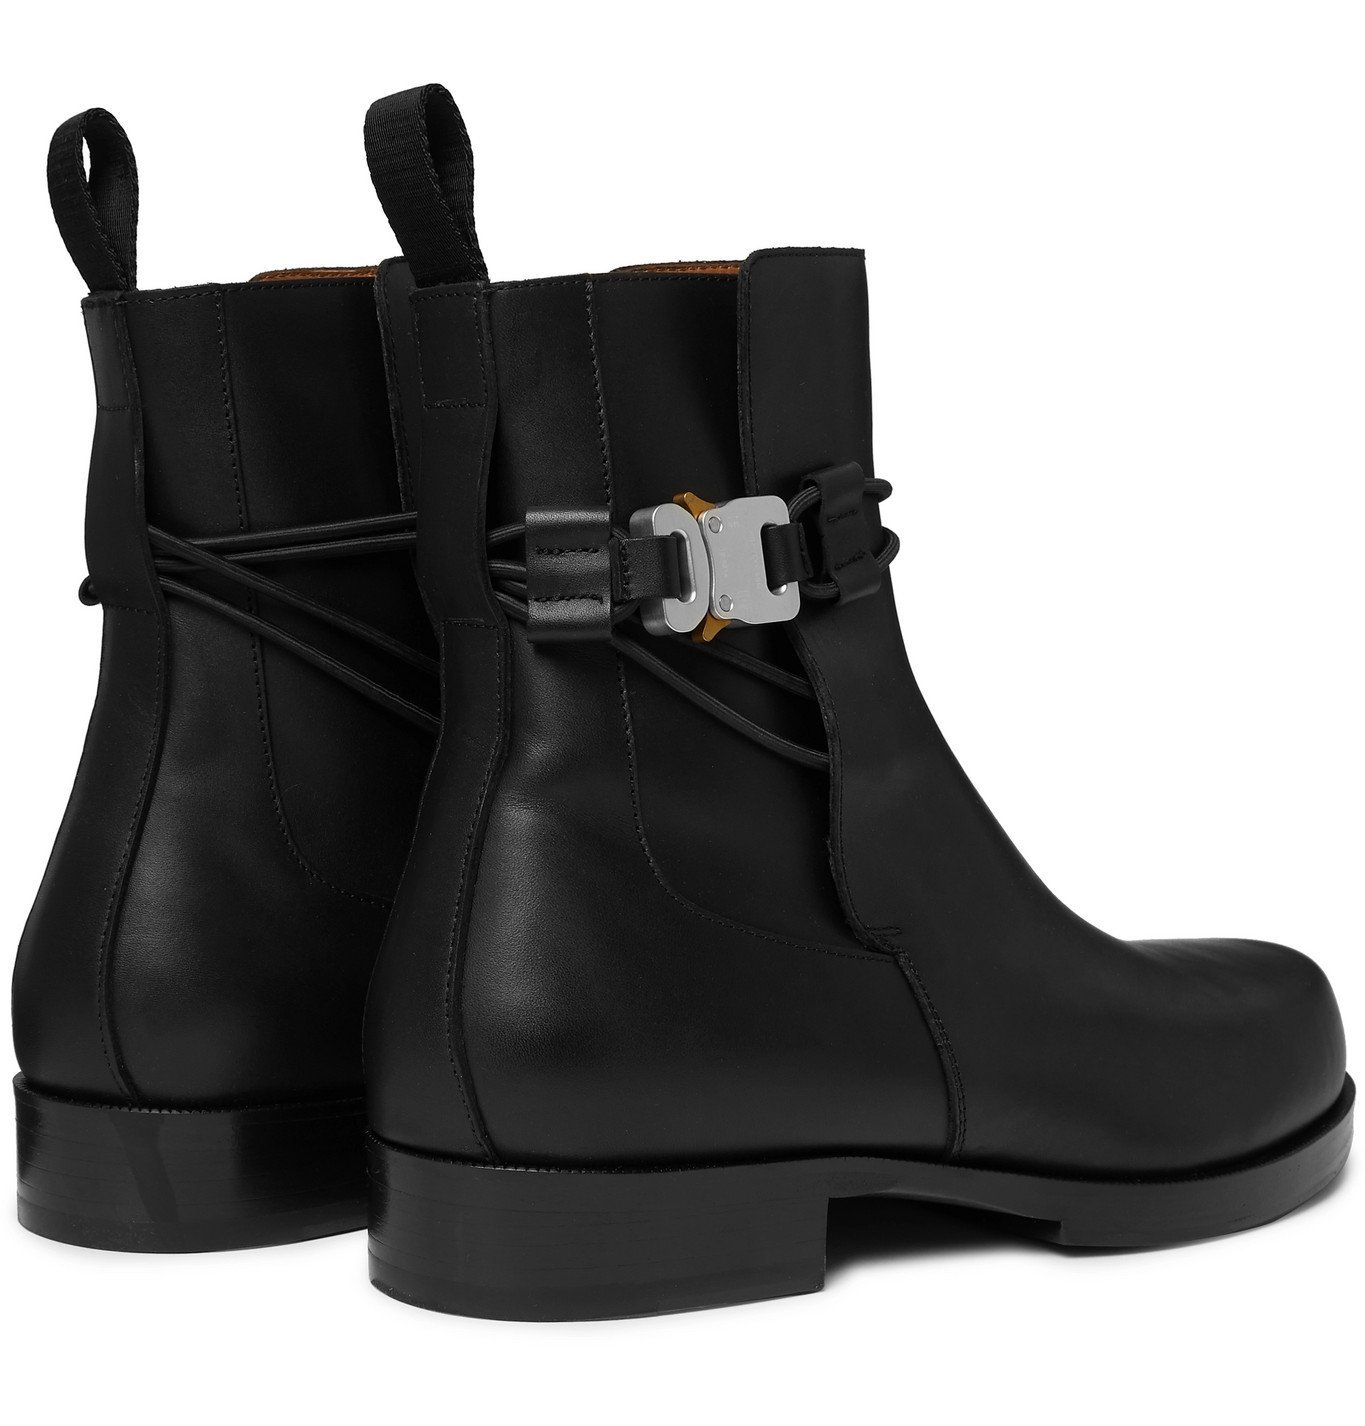 1017 ALYX 9SM - Buckled Leather Chelsea Boots - Black 1017 ALYX 9SM